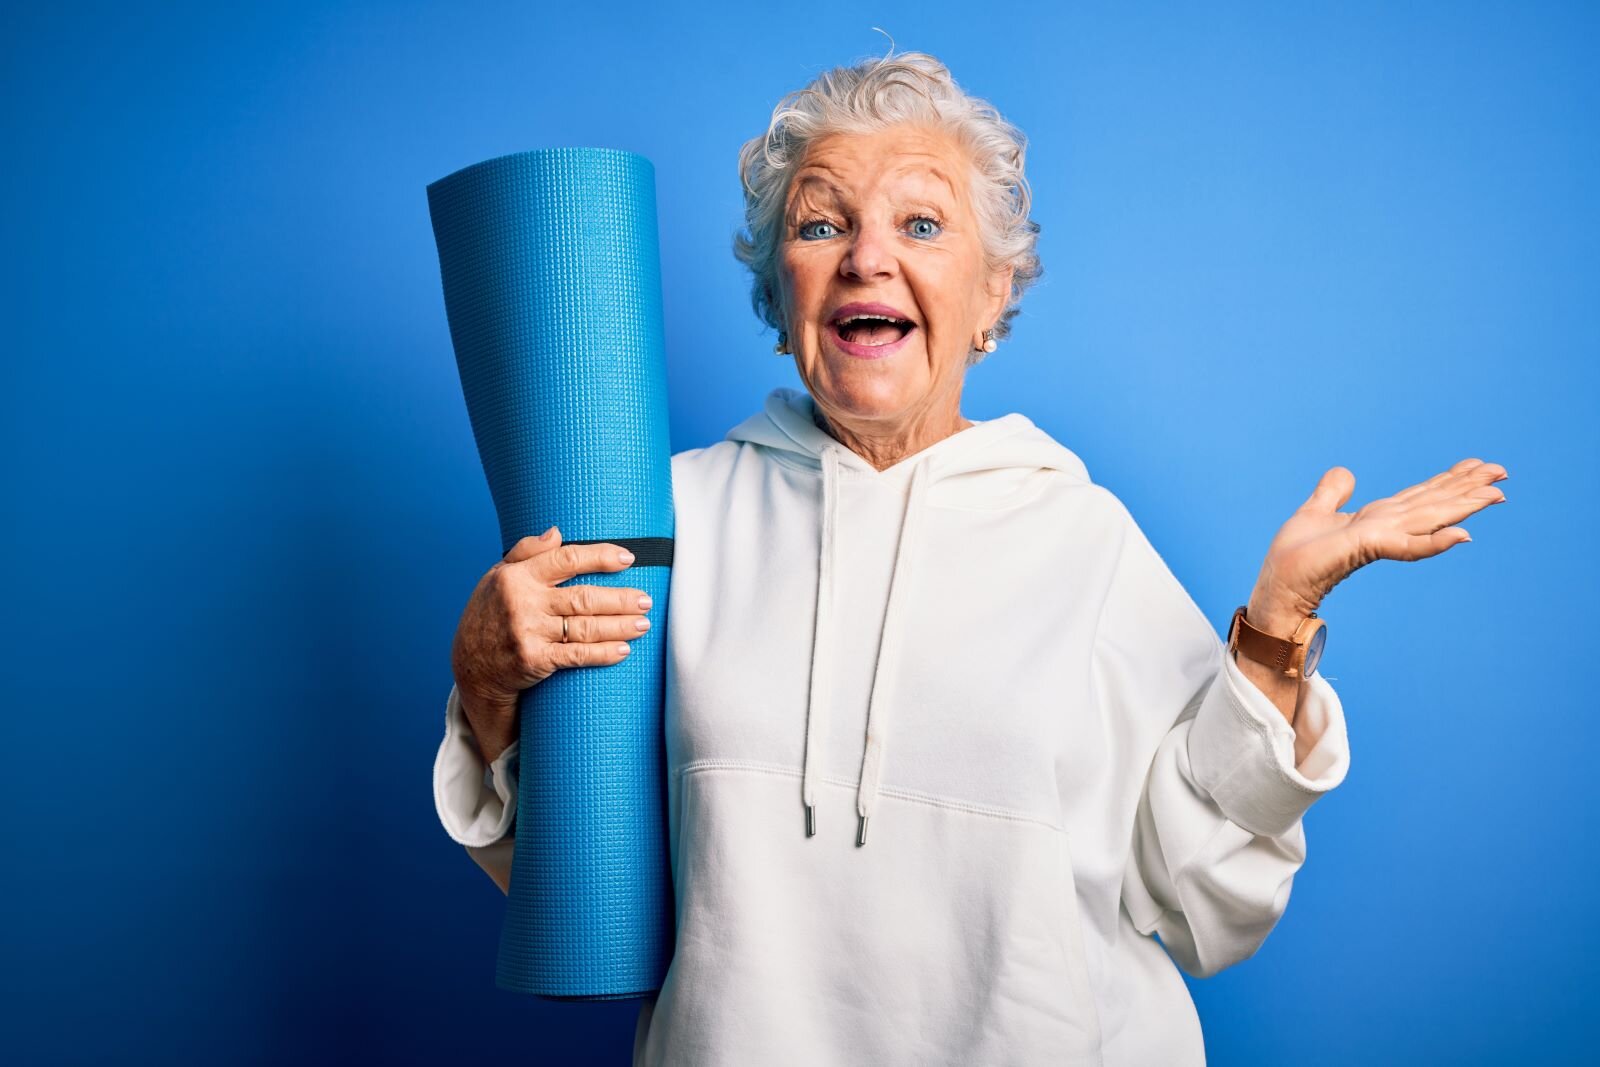 Chair Yoga for Seniors: 7 Poses To Support Mobility